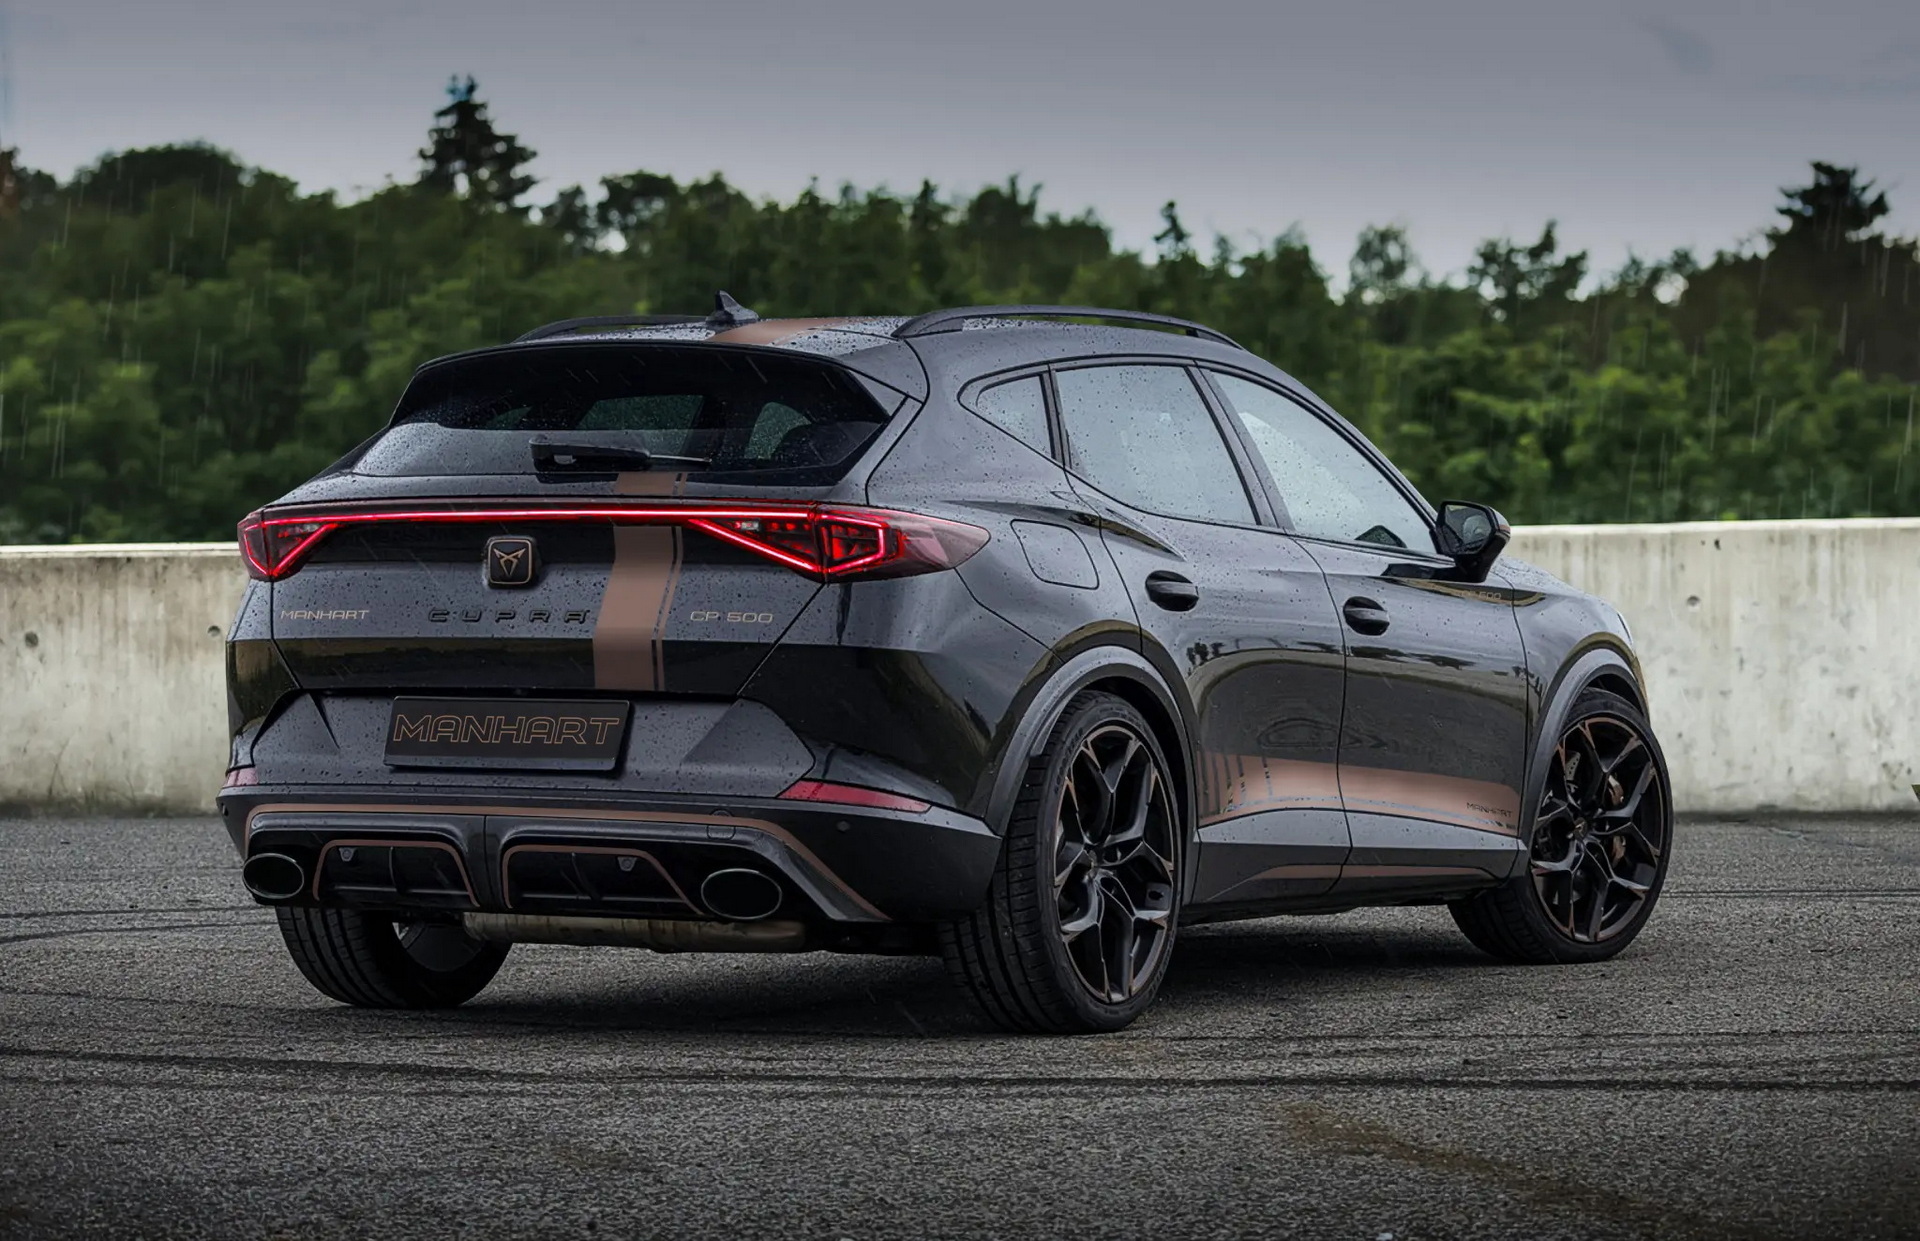 The Cupra Formentor VZ5 has five-cylinders and 385bhp